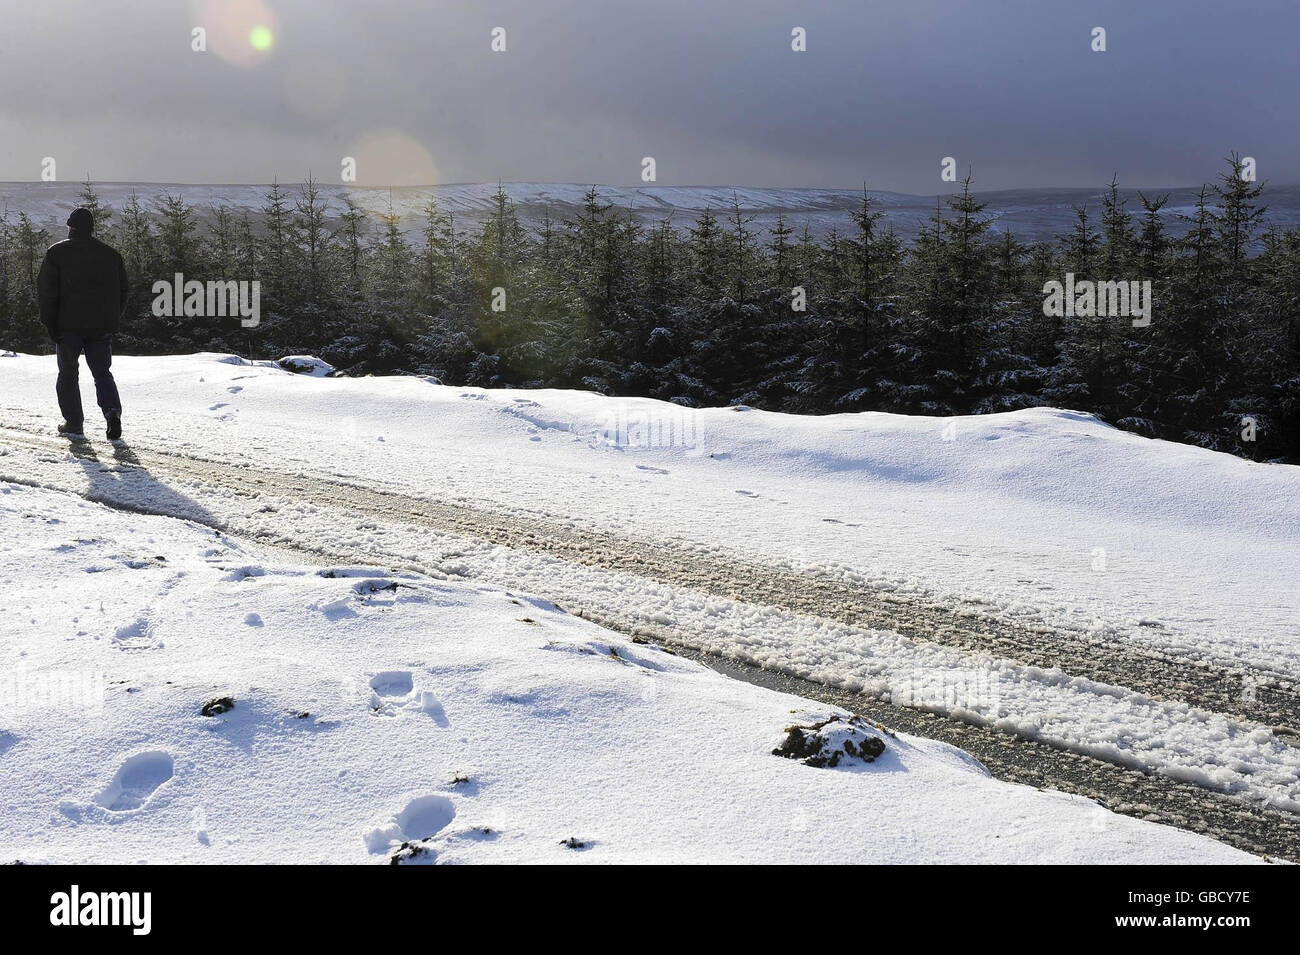 Ice and snow cover roads and hills around the A66 cross Pennine route in Barras, Cumbria. Stock Photo